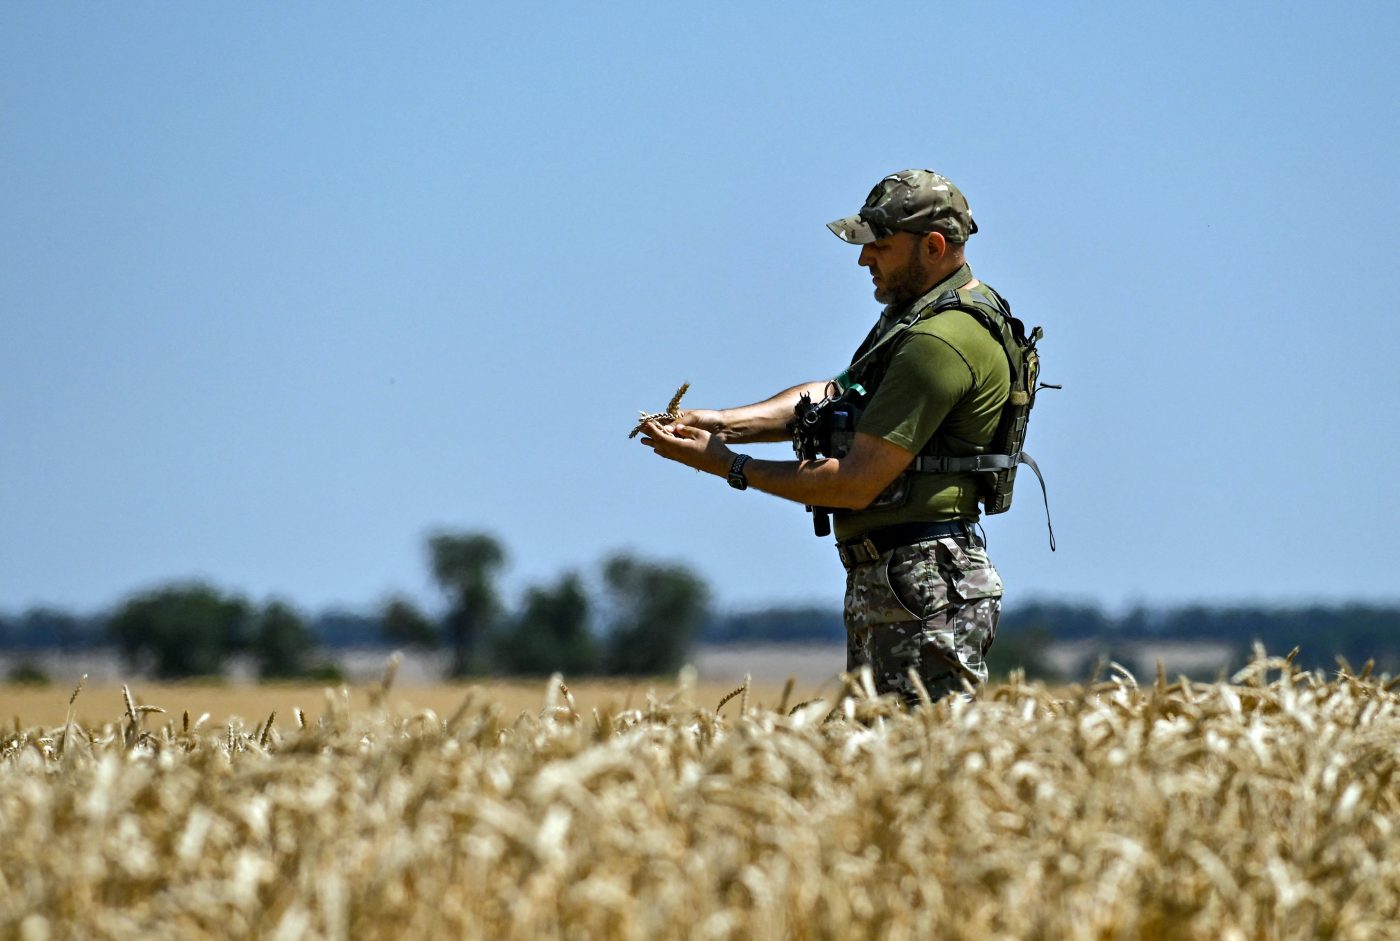 Photo: Zaporizhzhia Region, Ukraine - July 17, 2022 - A serviceman holds wheat ears during the harvest season, Zaporizhzhia Region, southeastern Ukraine. This photo cannot be distributed in the Russian Federation. Credit: Photo by Dmytro Smolyenko/Ukrinform/ABACAPRESS.COMN